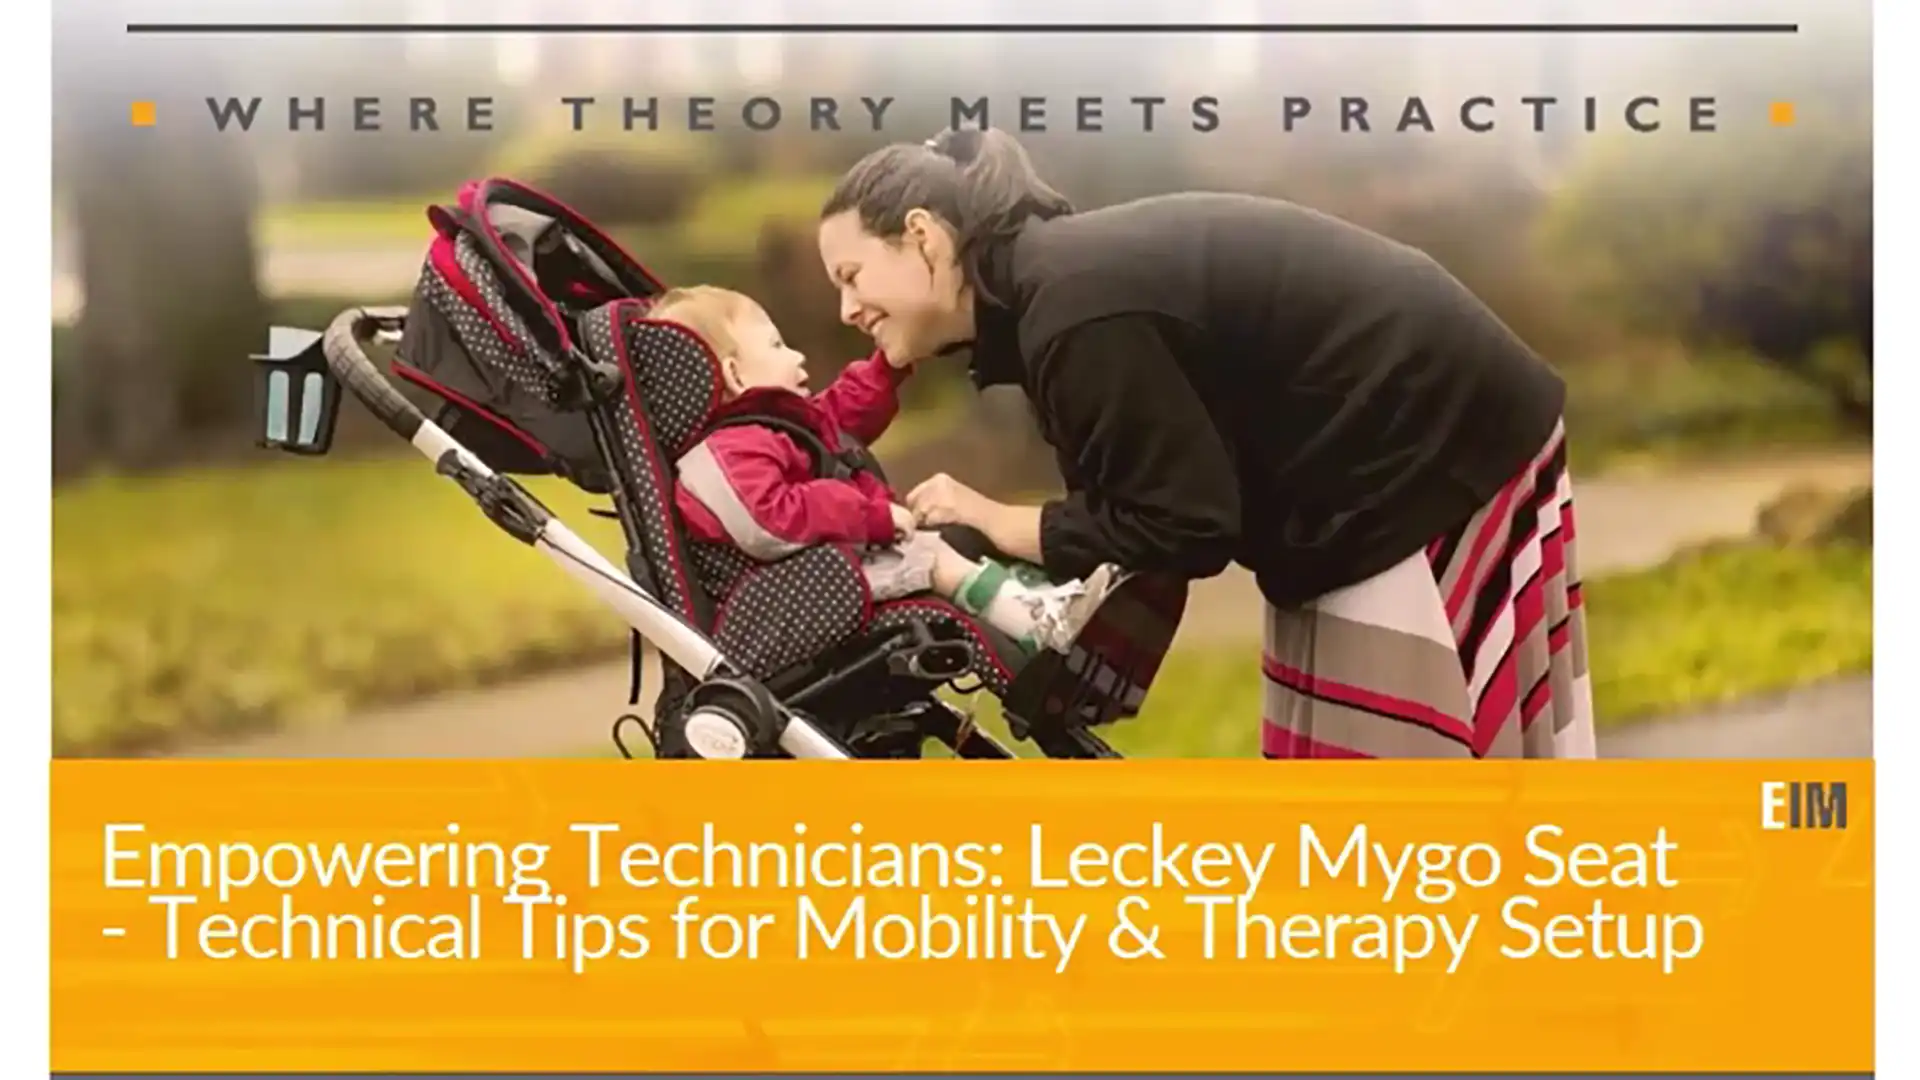 Empowering Technicians: Leckey Mygo Seat - Technical Tips for Mobility and Therapy Setup